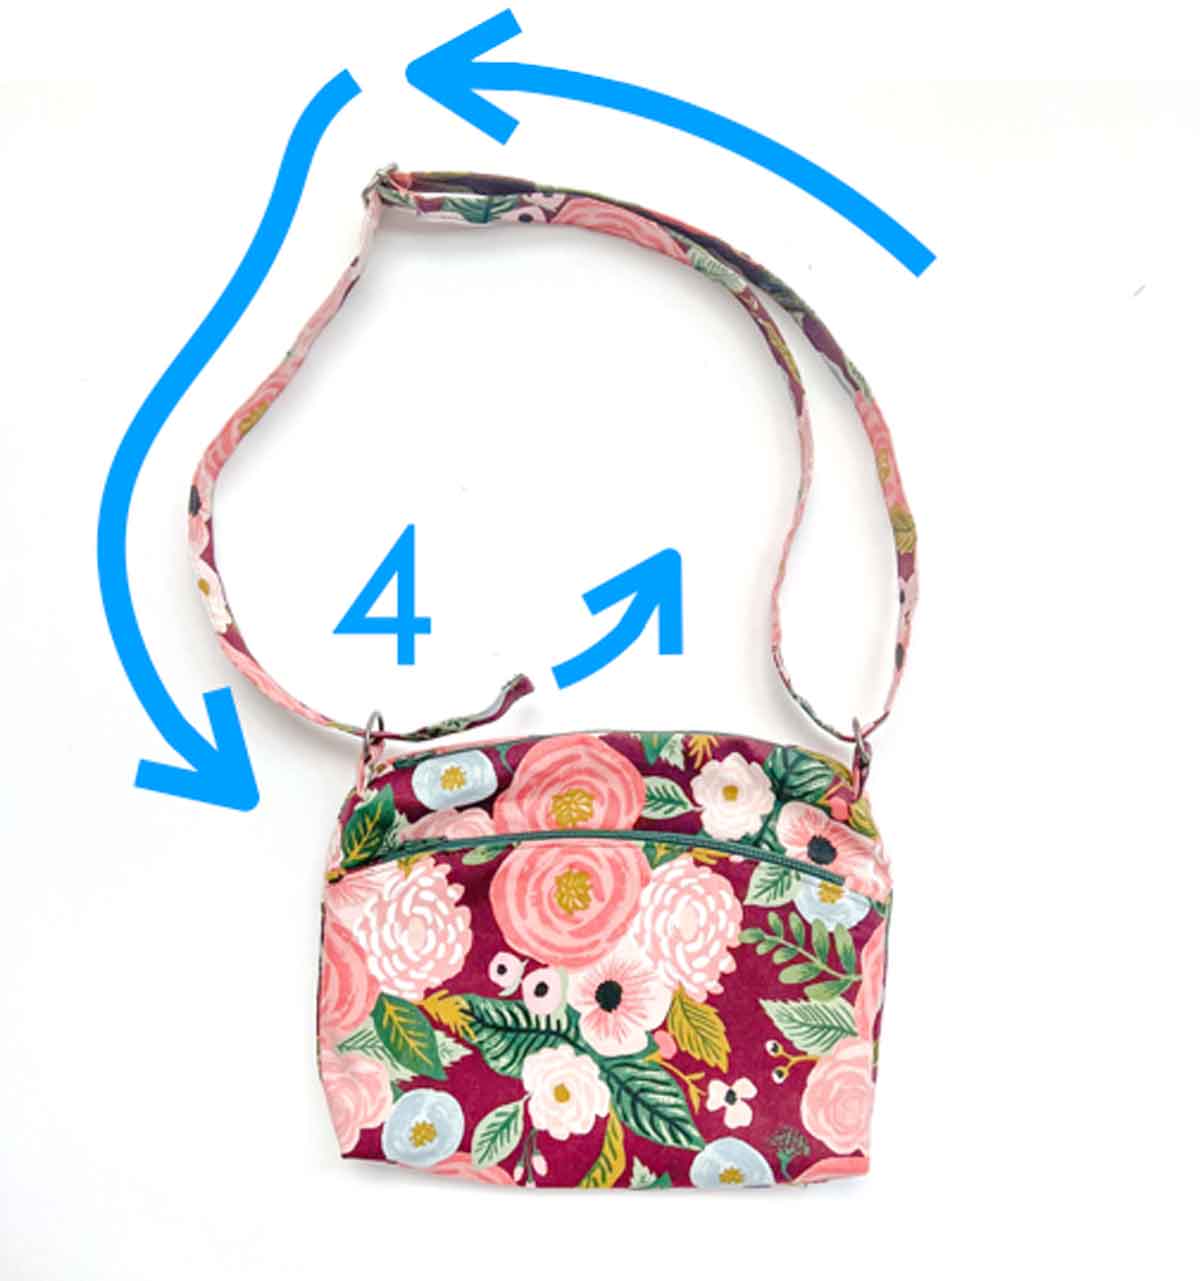 sequence of how to thread bag strap through D ring and bag slider (continued).